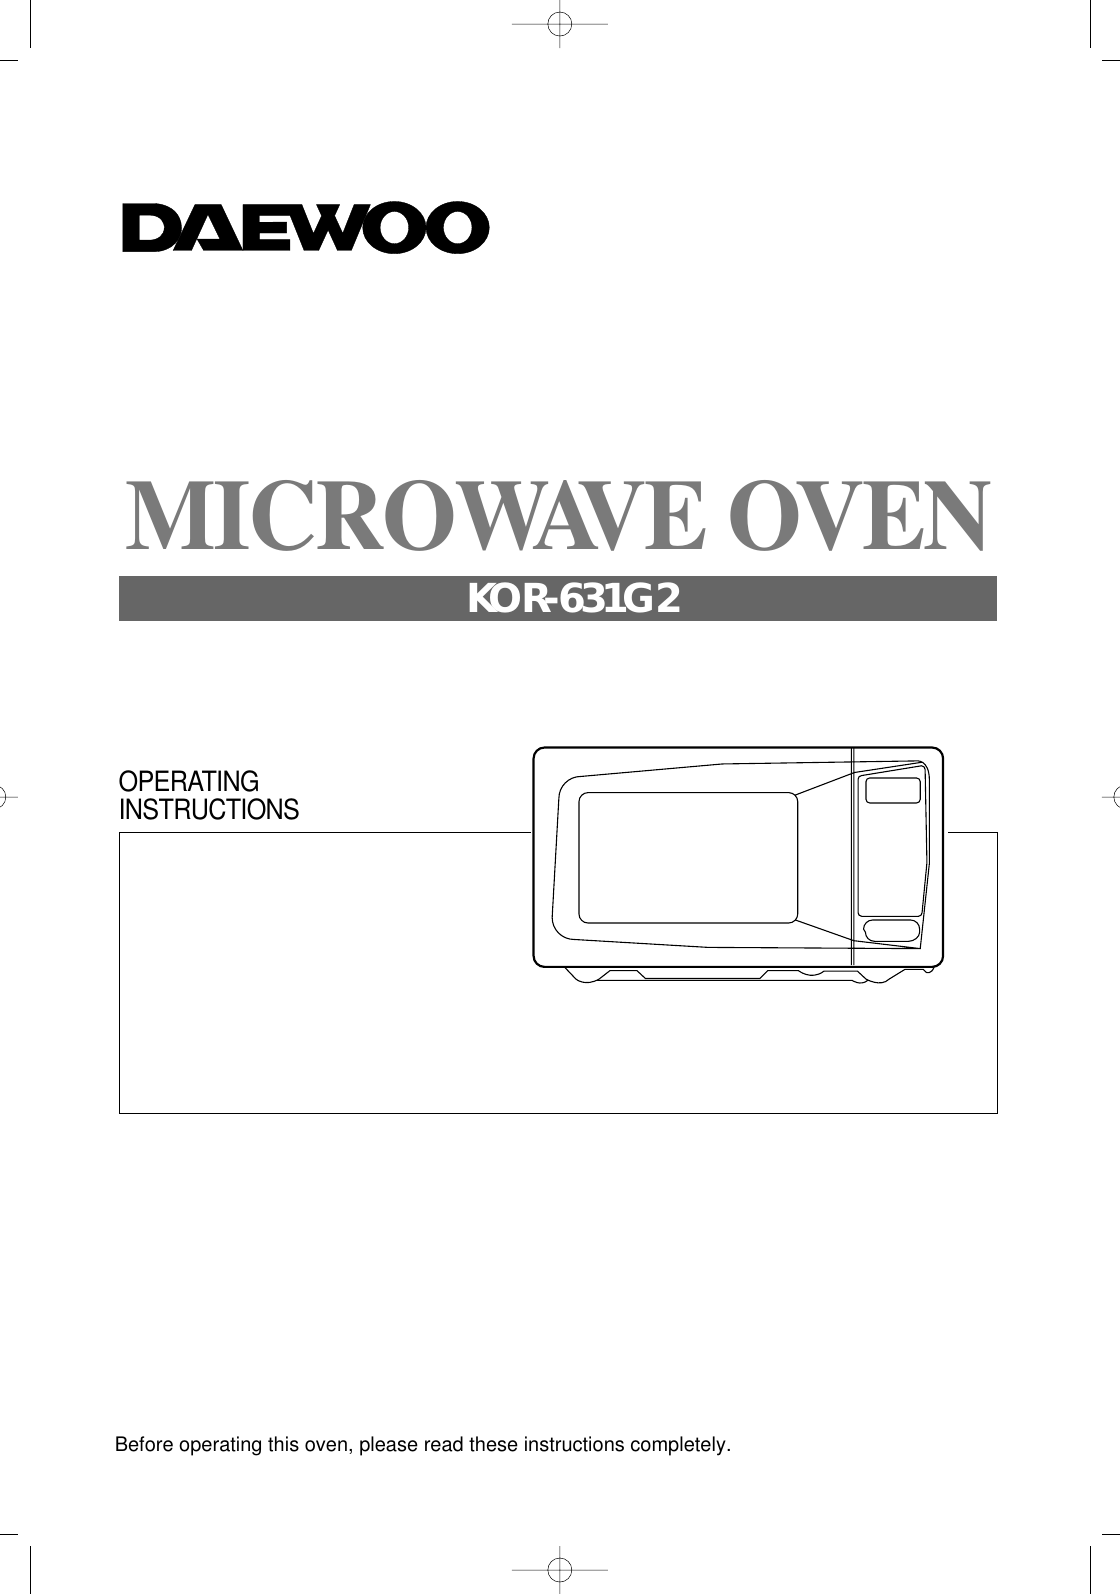 Before operating this oven, please read these instructions completely.OPERATINGINSTRUCTIONSMICROWAVE OVENKOR-631G2